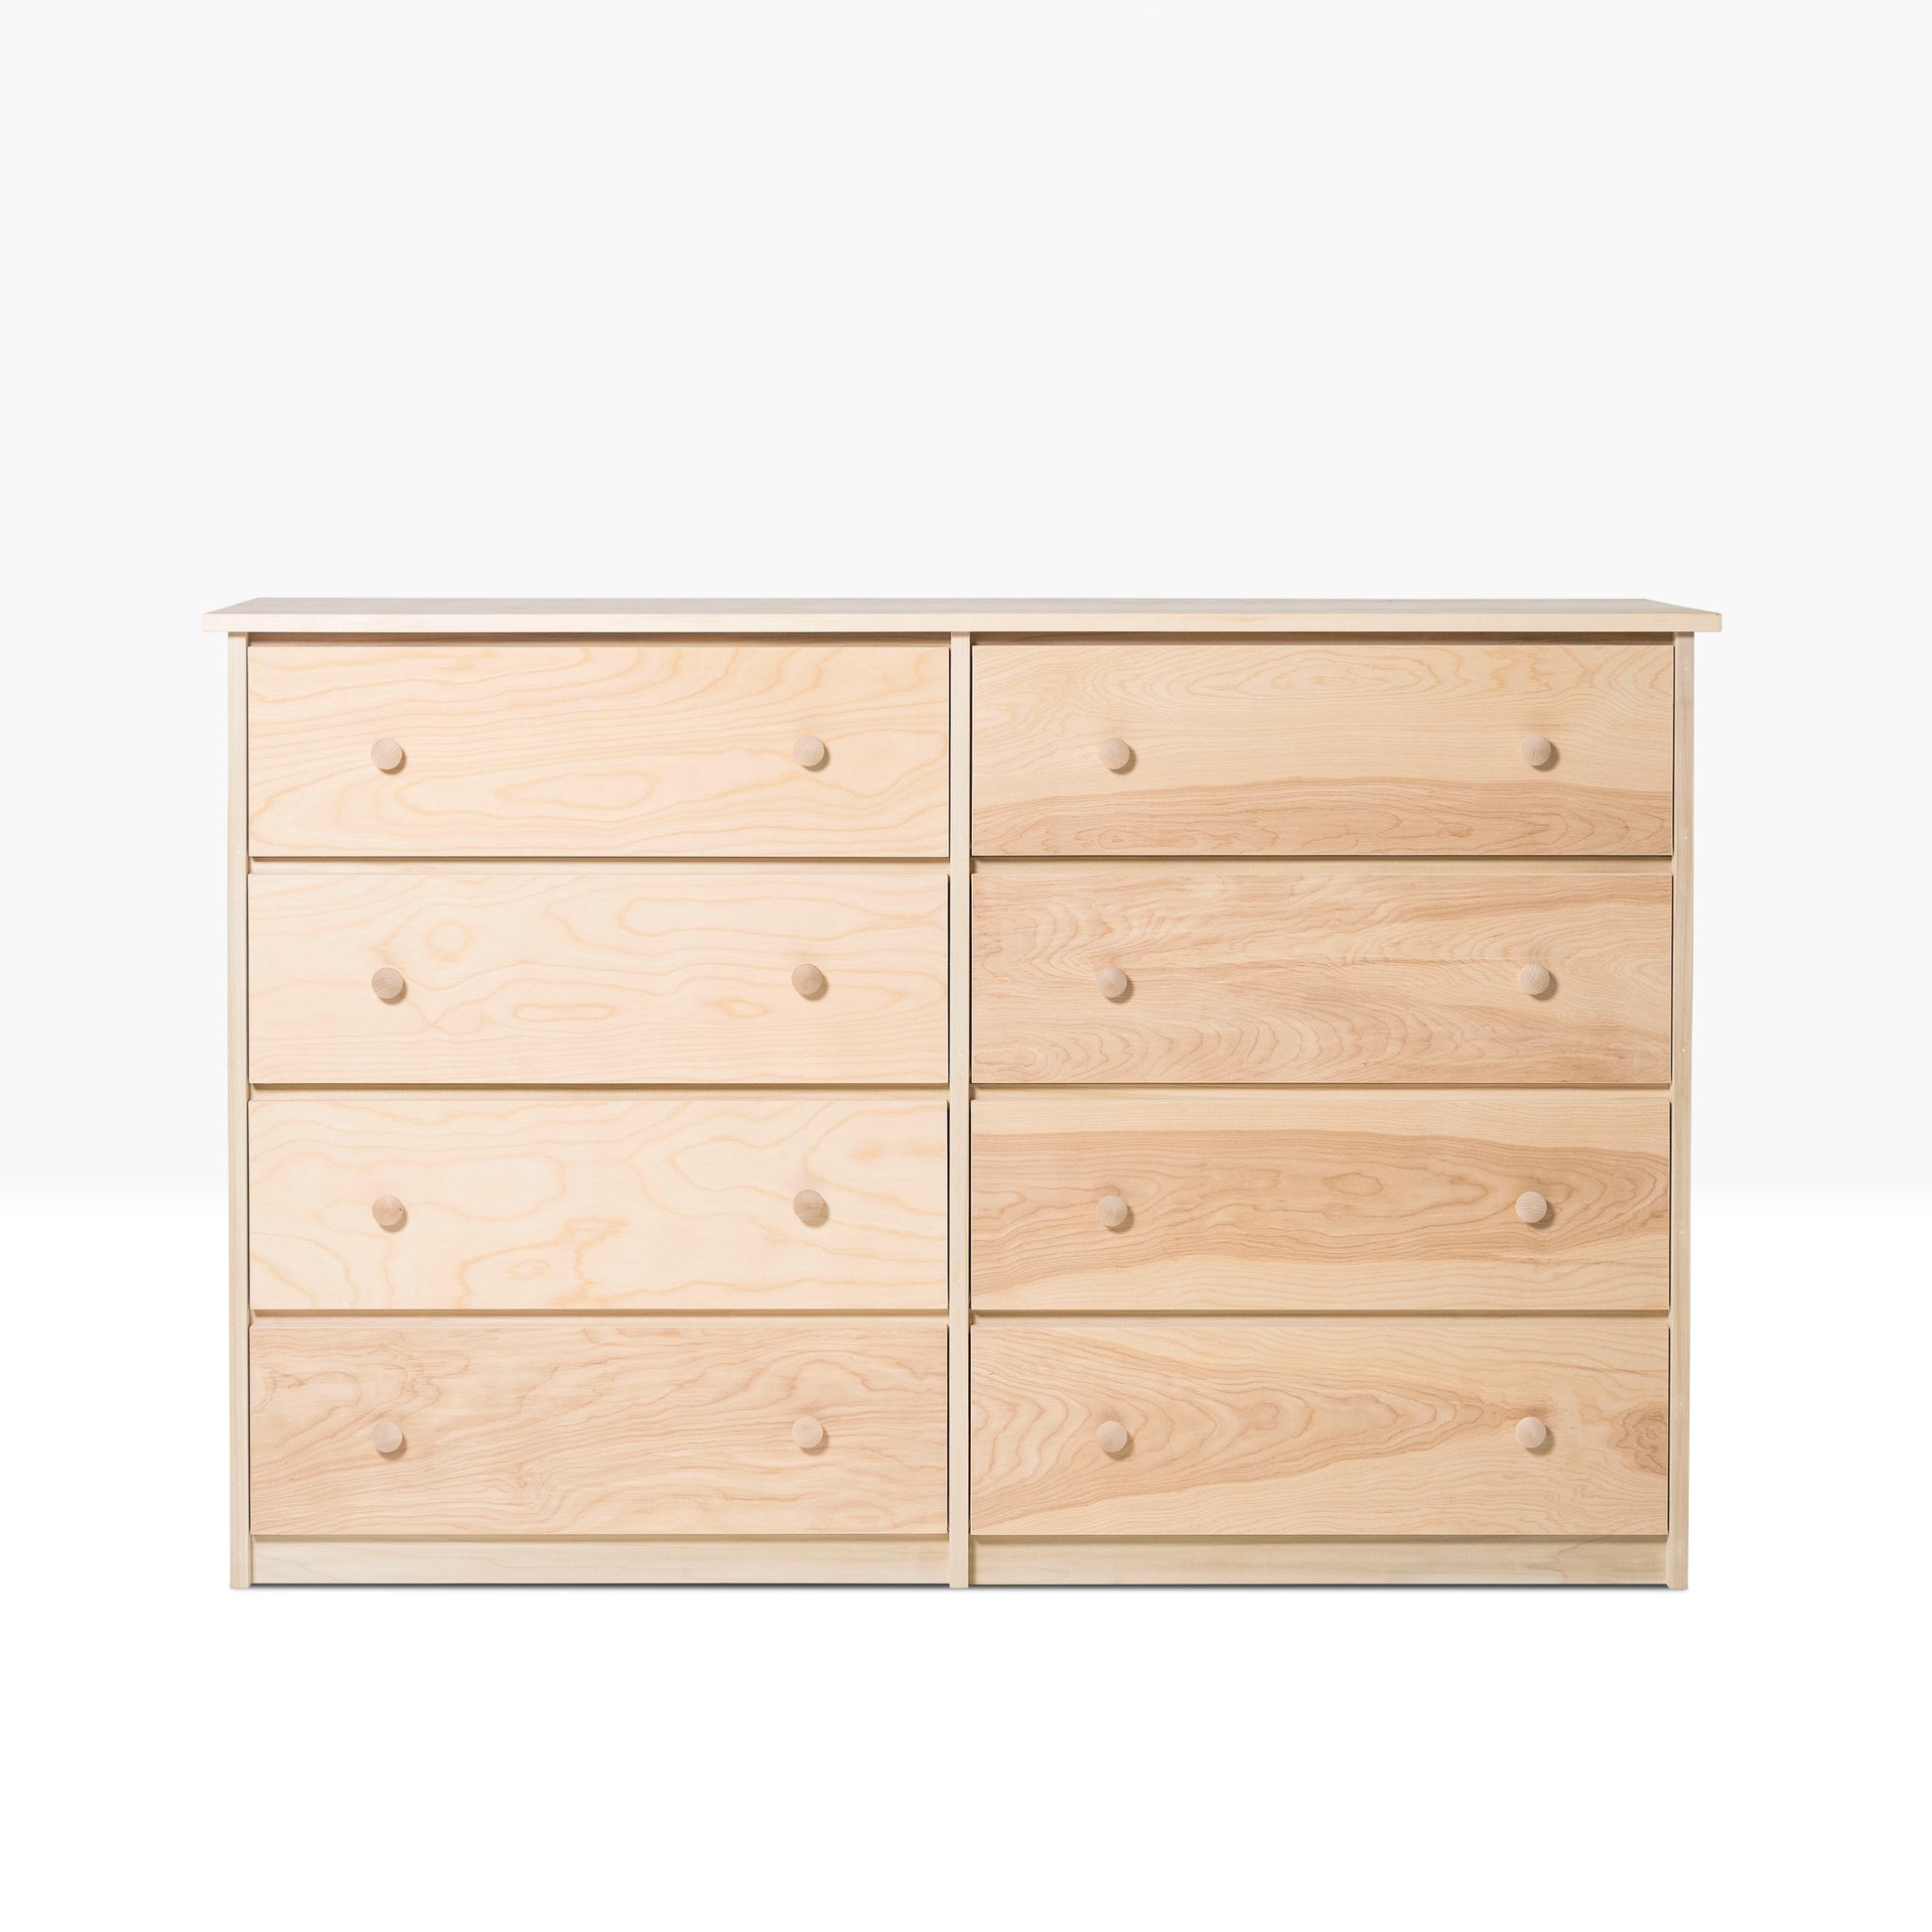 Evergreen Dresser features eight drawers constructed in pine and birch, shown unfinished.